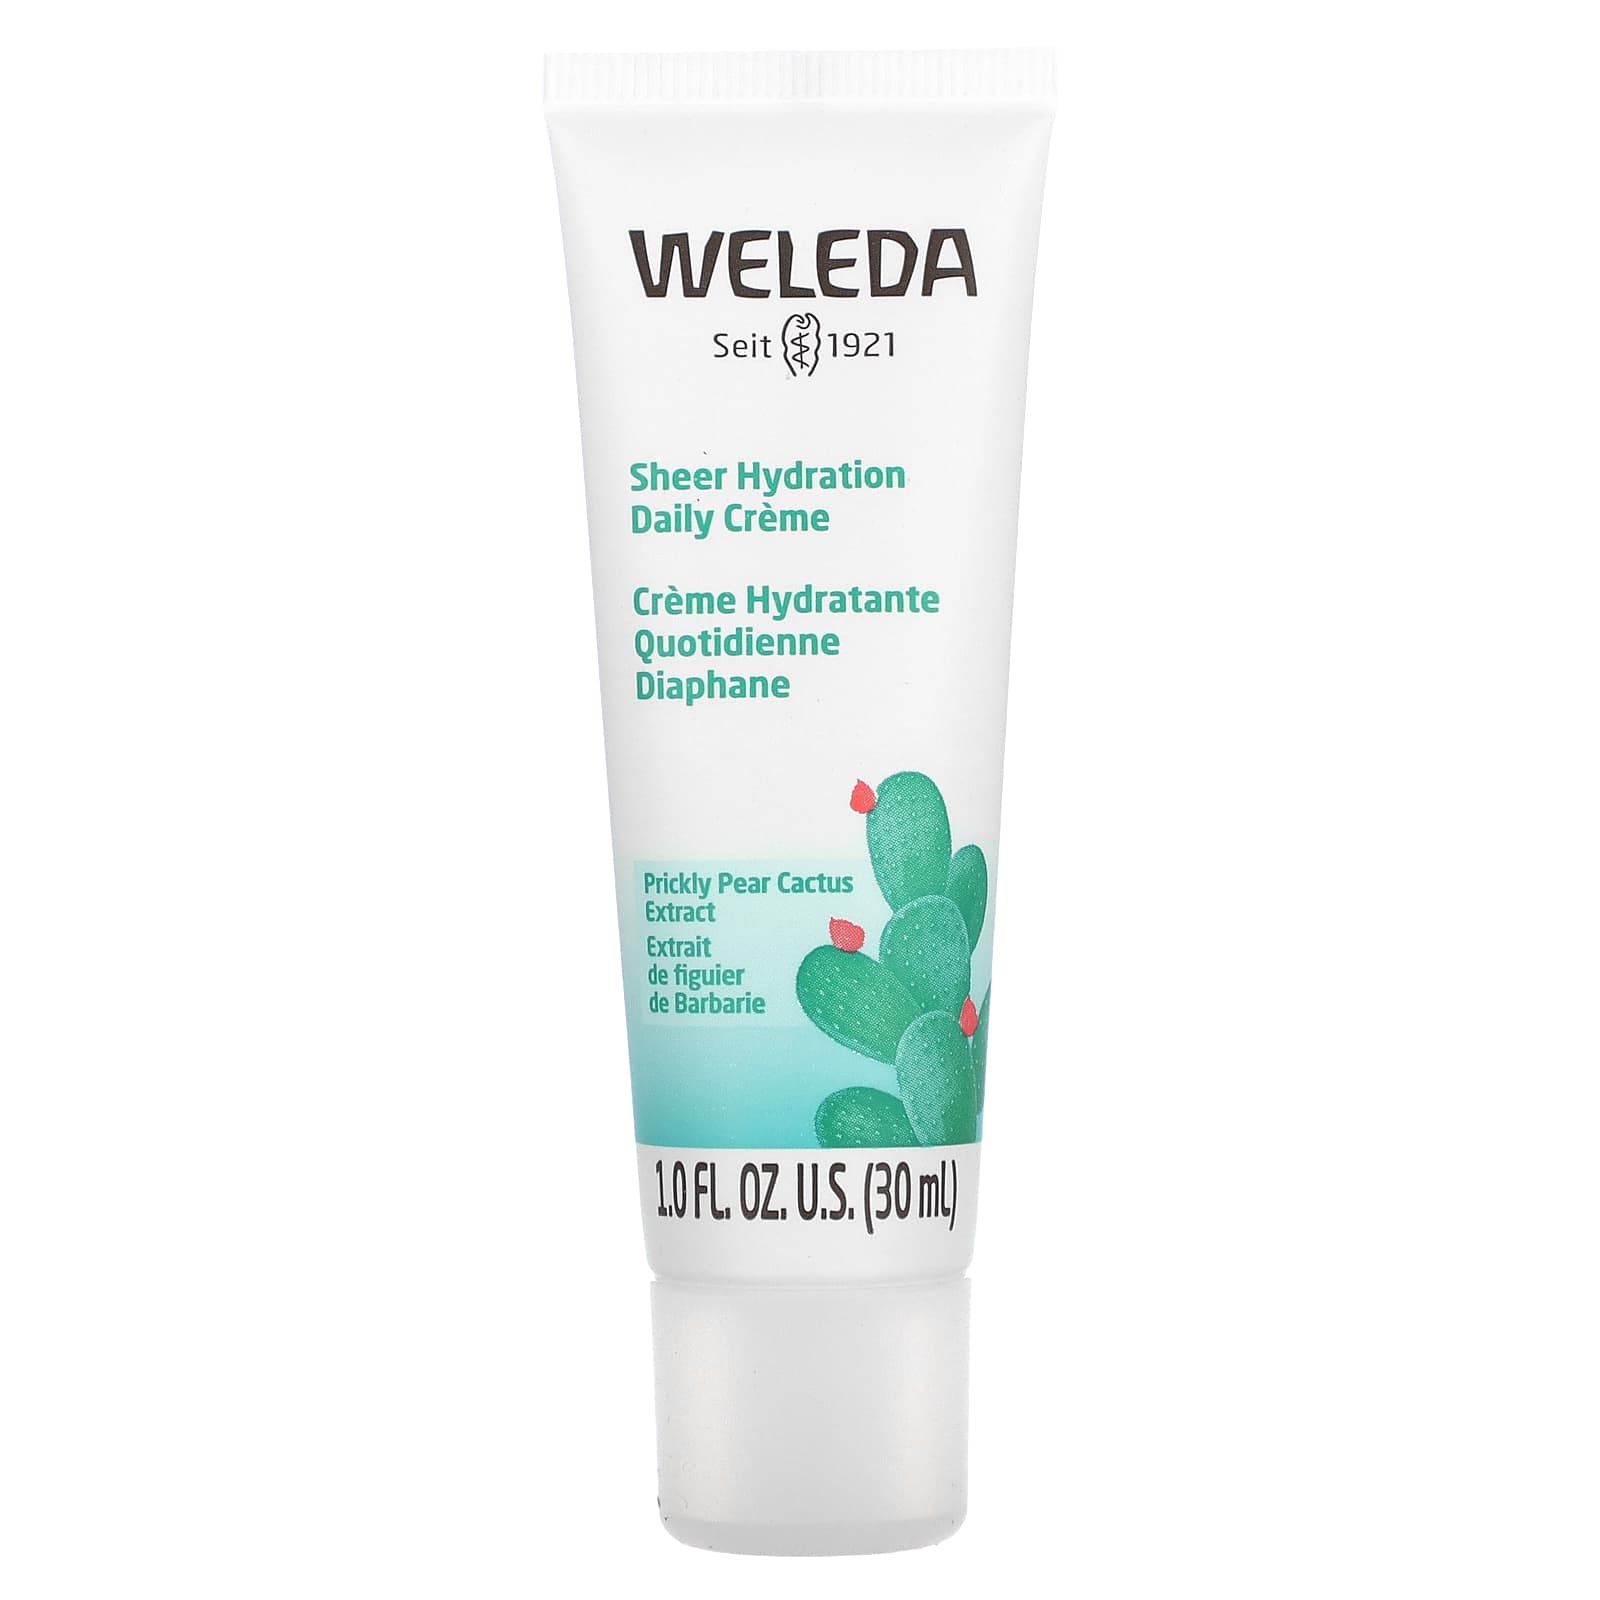 We tried Weleda Skin Food for a month, and here's what we thought… — The  Reduce Report